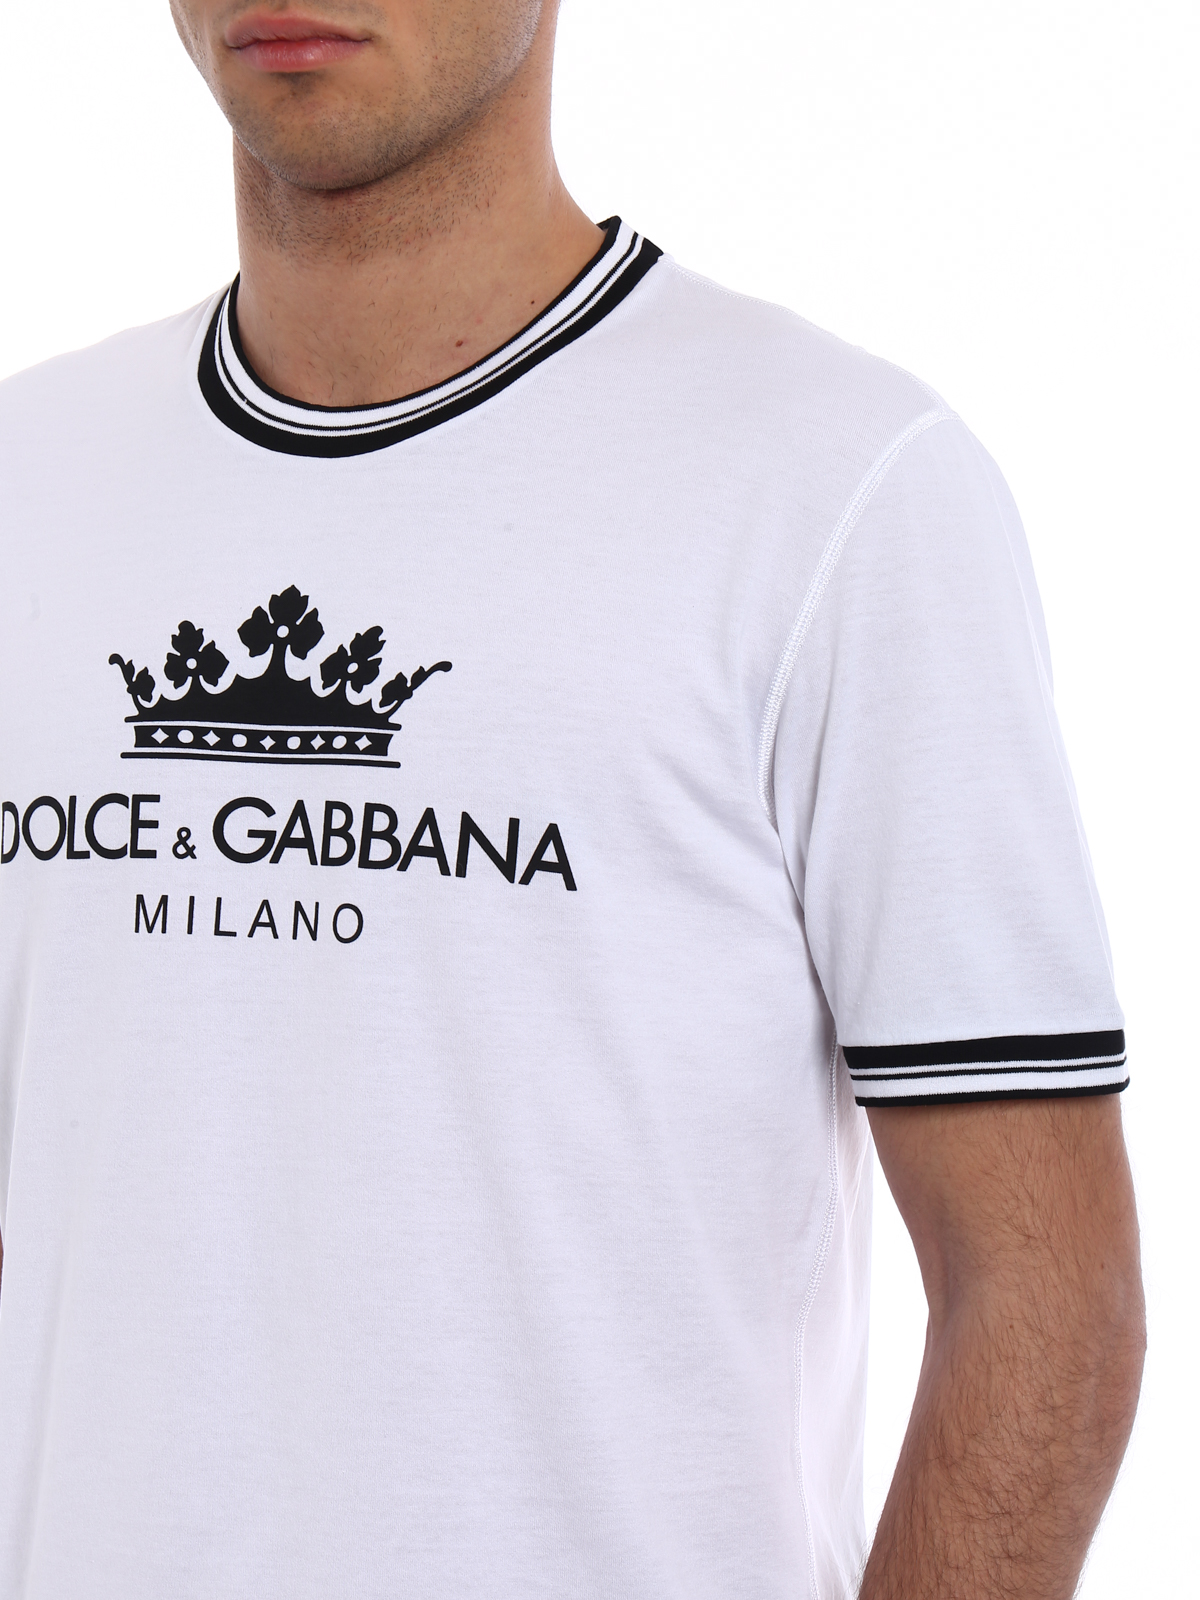 dolce and gabbana crown for sale